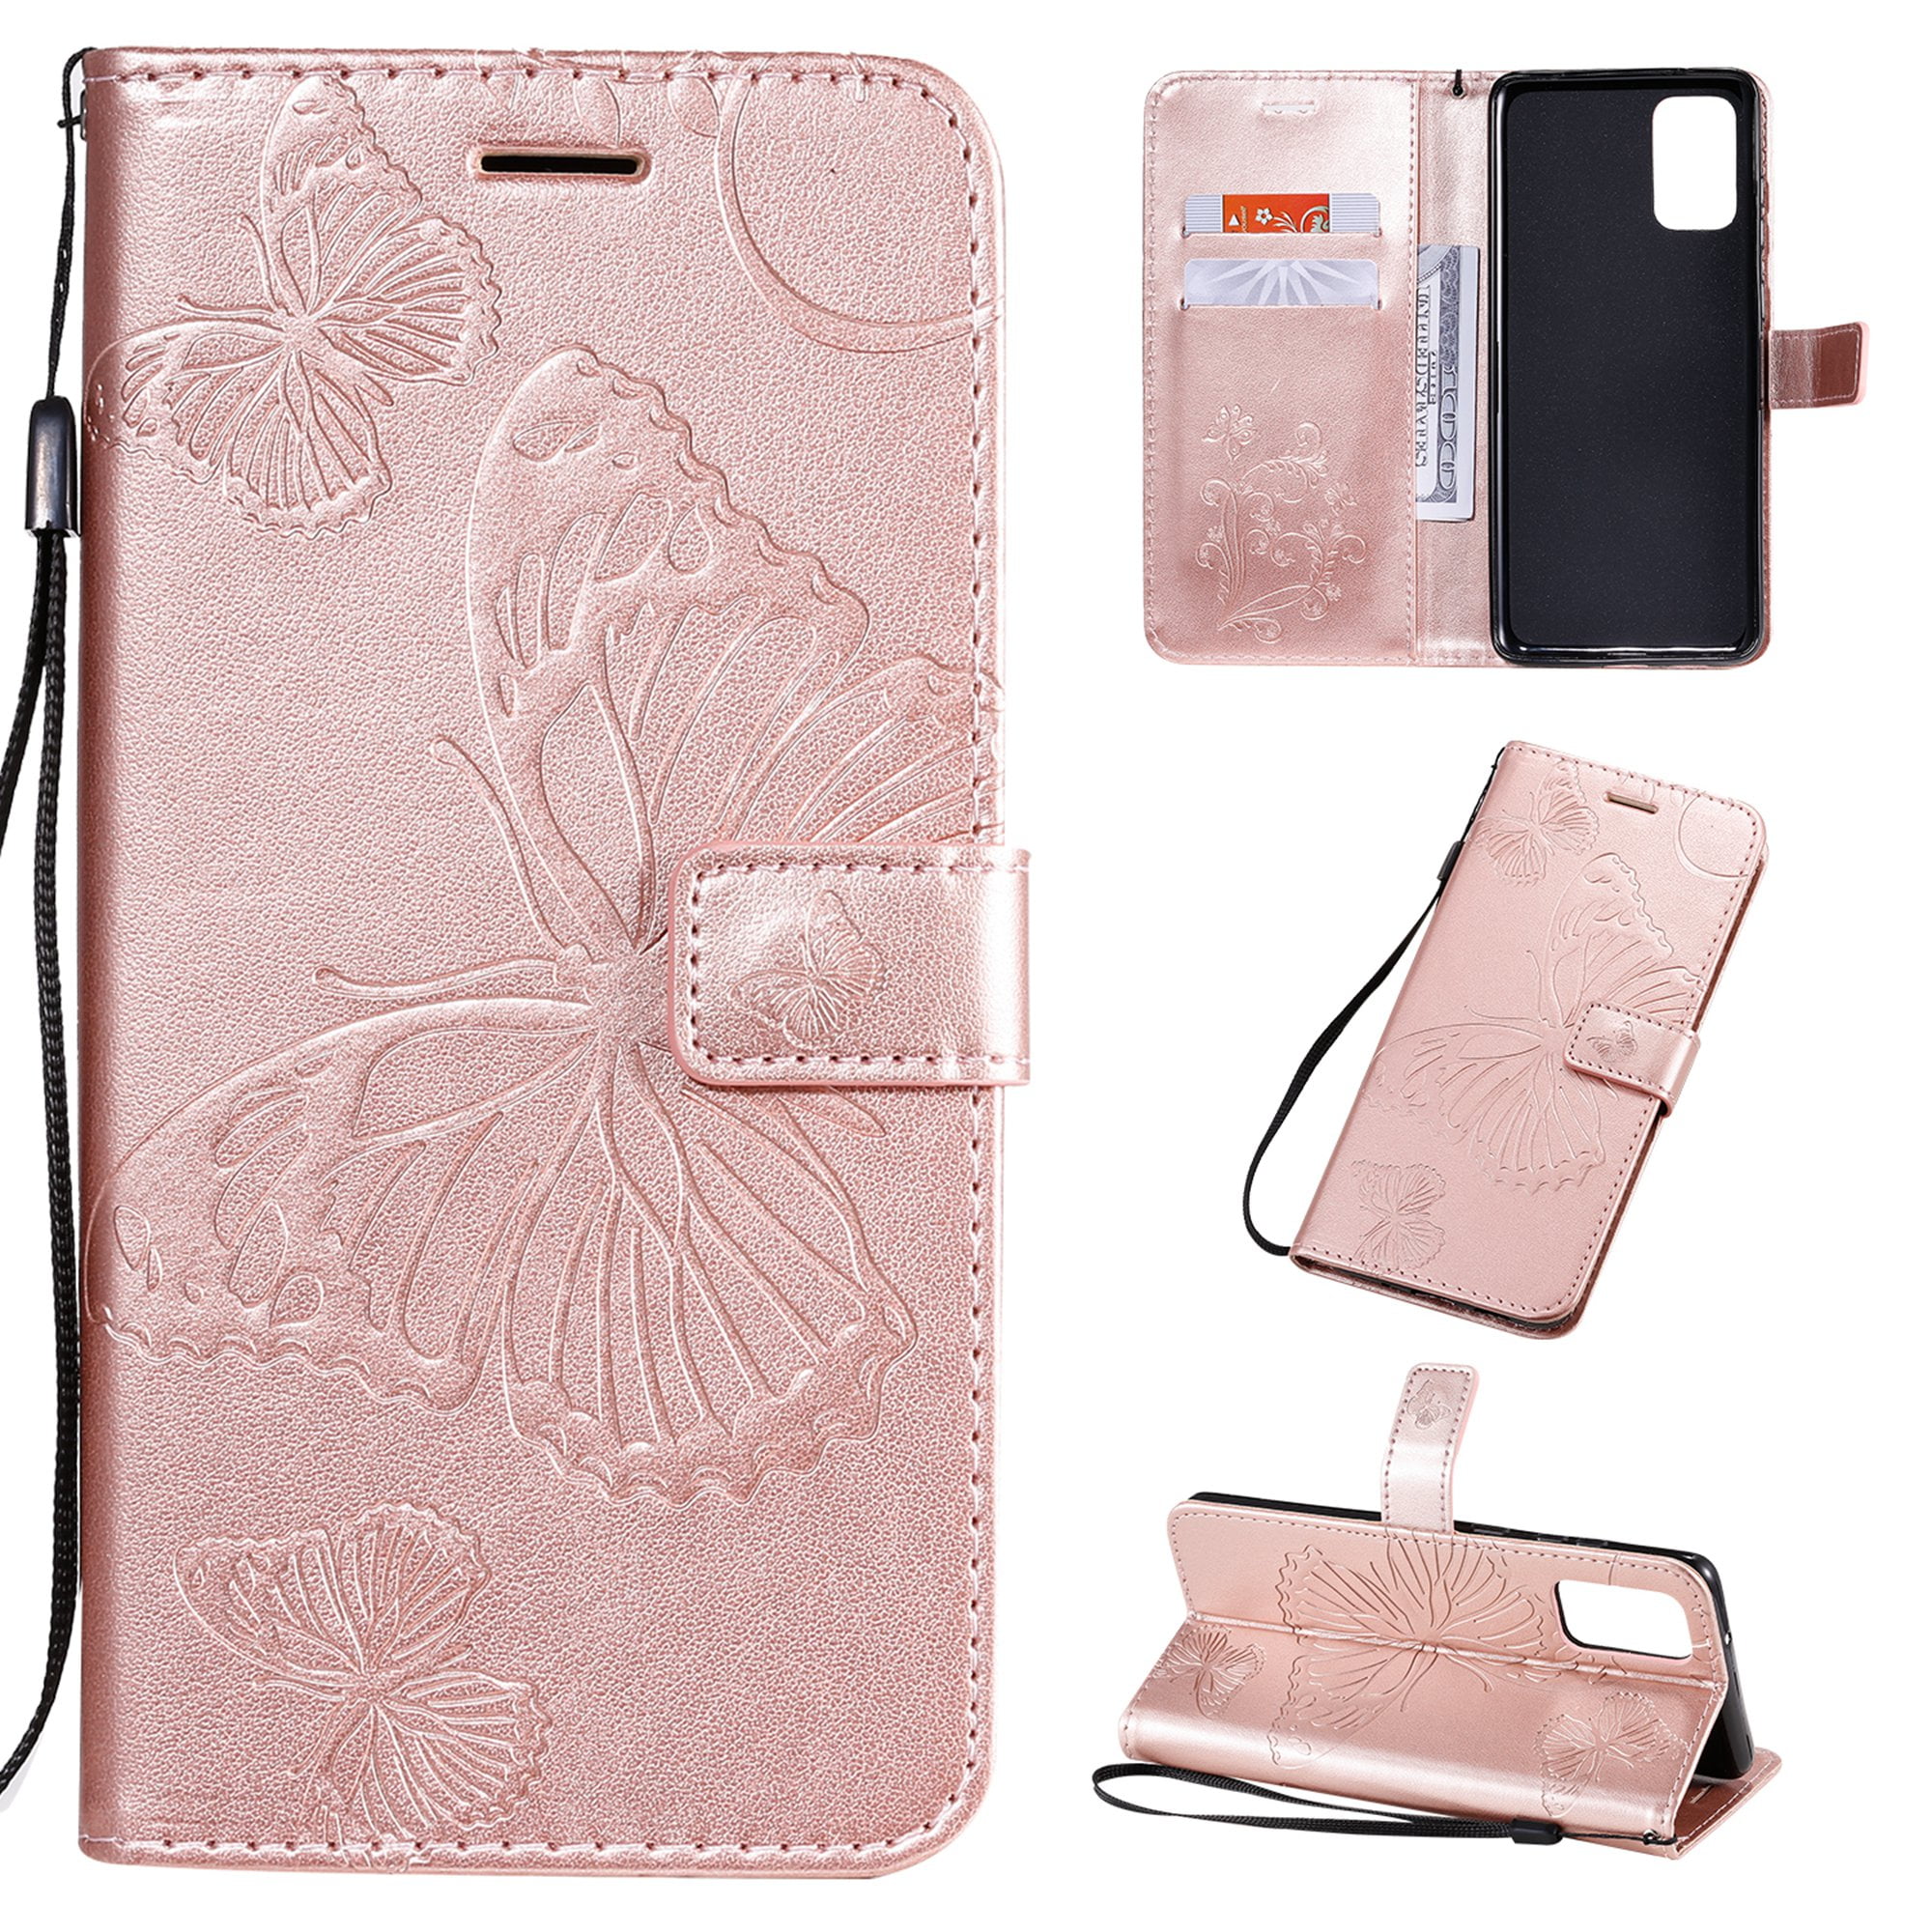 Galaxy J2 Pro 2018 Case,Galaxy J2 Pro Wallet Case,Printed Design PU Leather Phone Protective Case Cover with Card Holder Slot Pocket Magnetic for Samsung Galaxy J2 Pro 2018,Rose Butterfly 